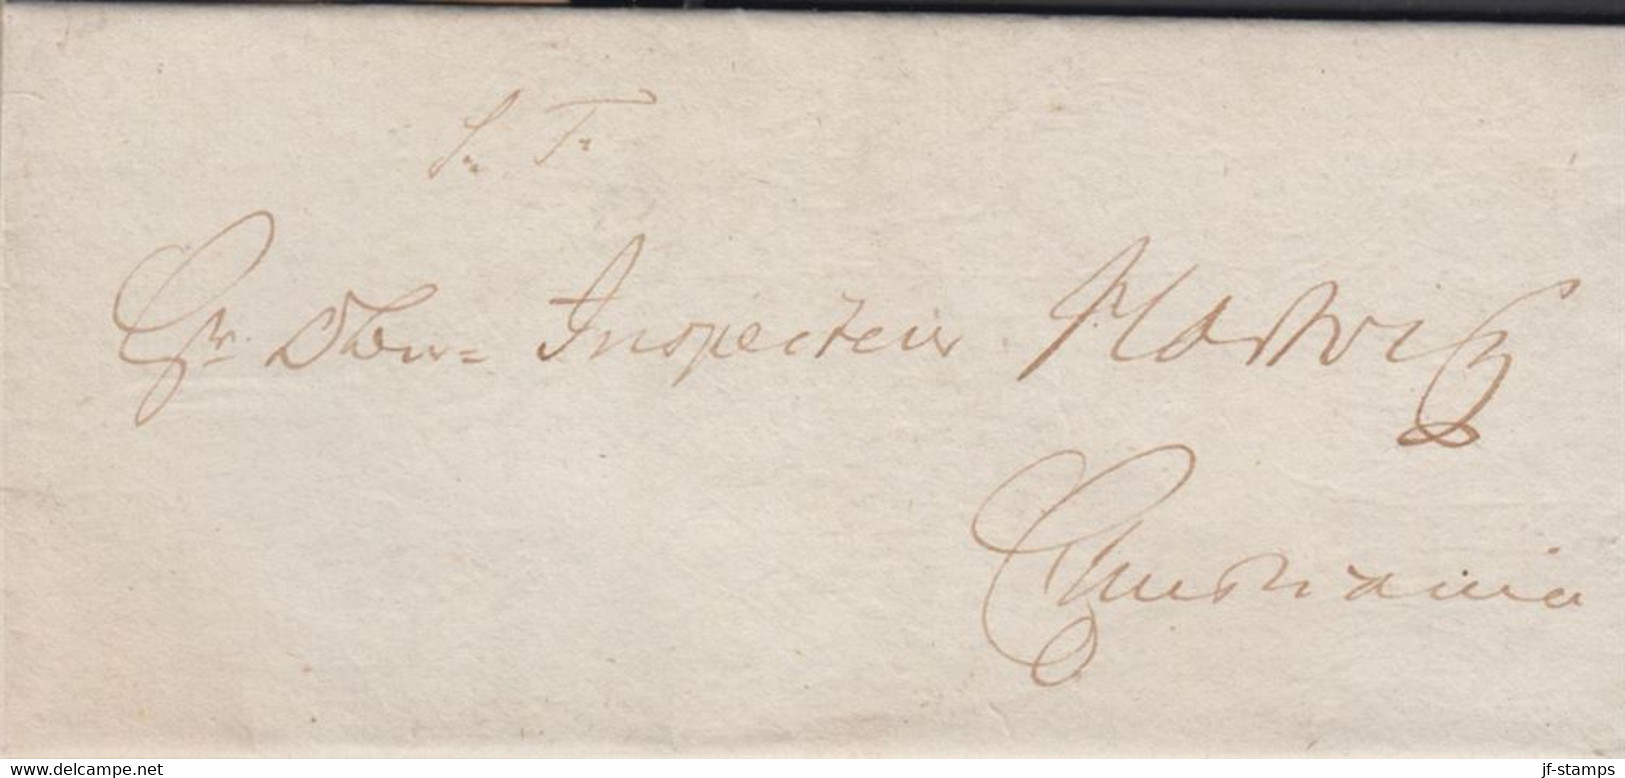 1800. NORGE. Very Old Beautiful Cover Dated Christiania 23. Oct 1800. LUXUS. Interesting.  - JF427641 - ...-1855 Voorfilatelie